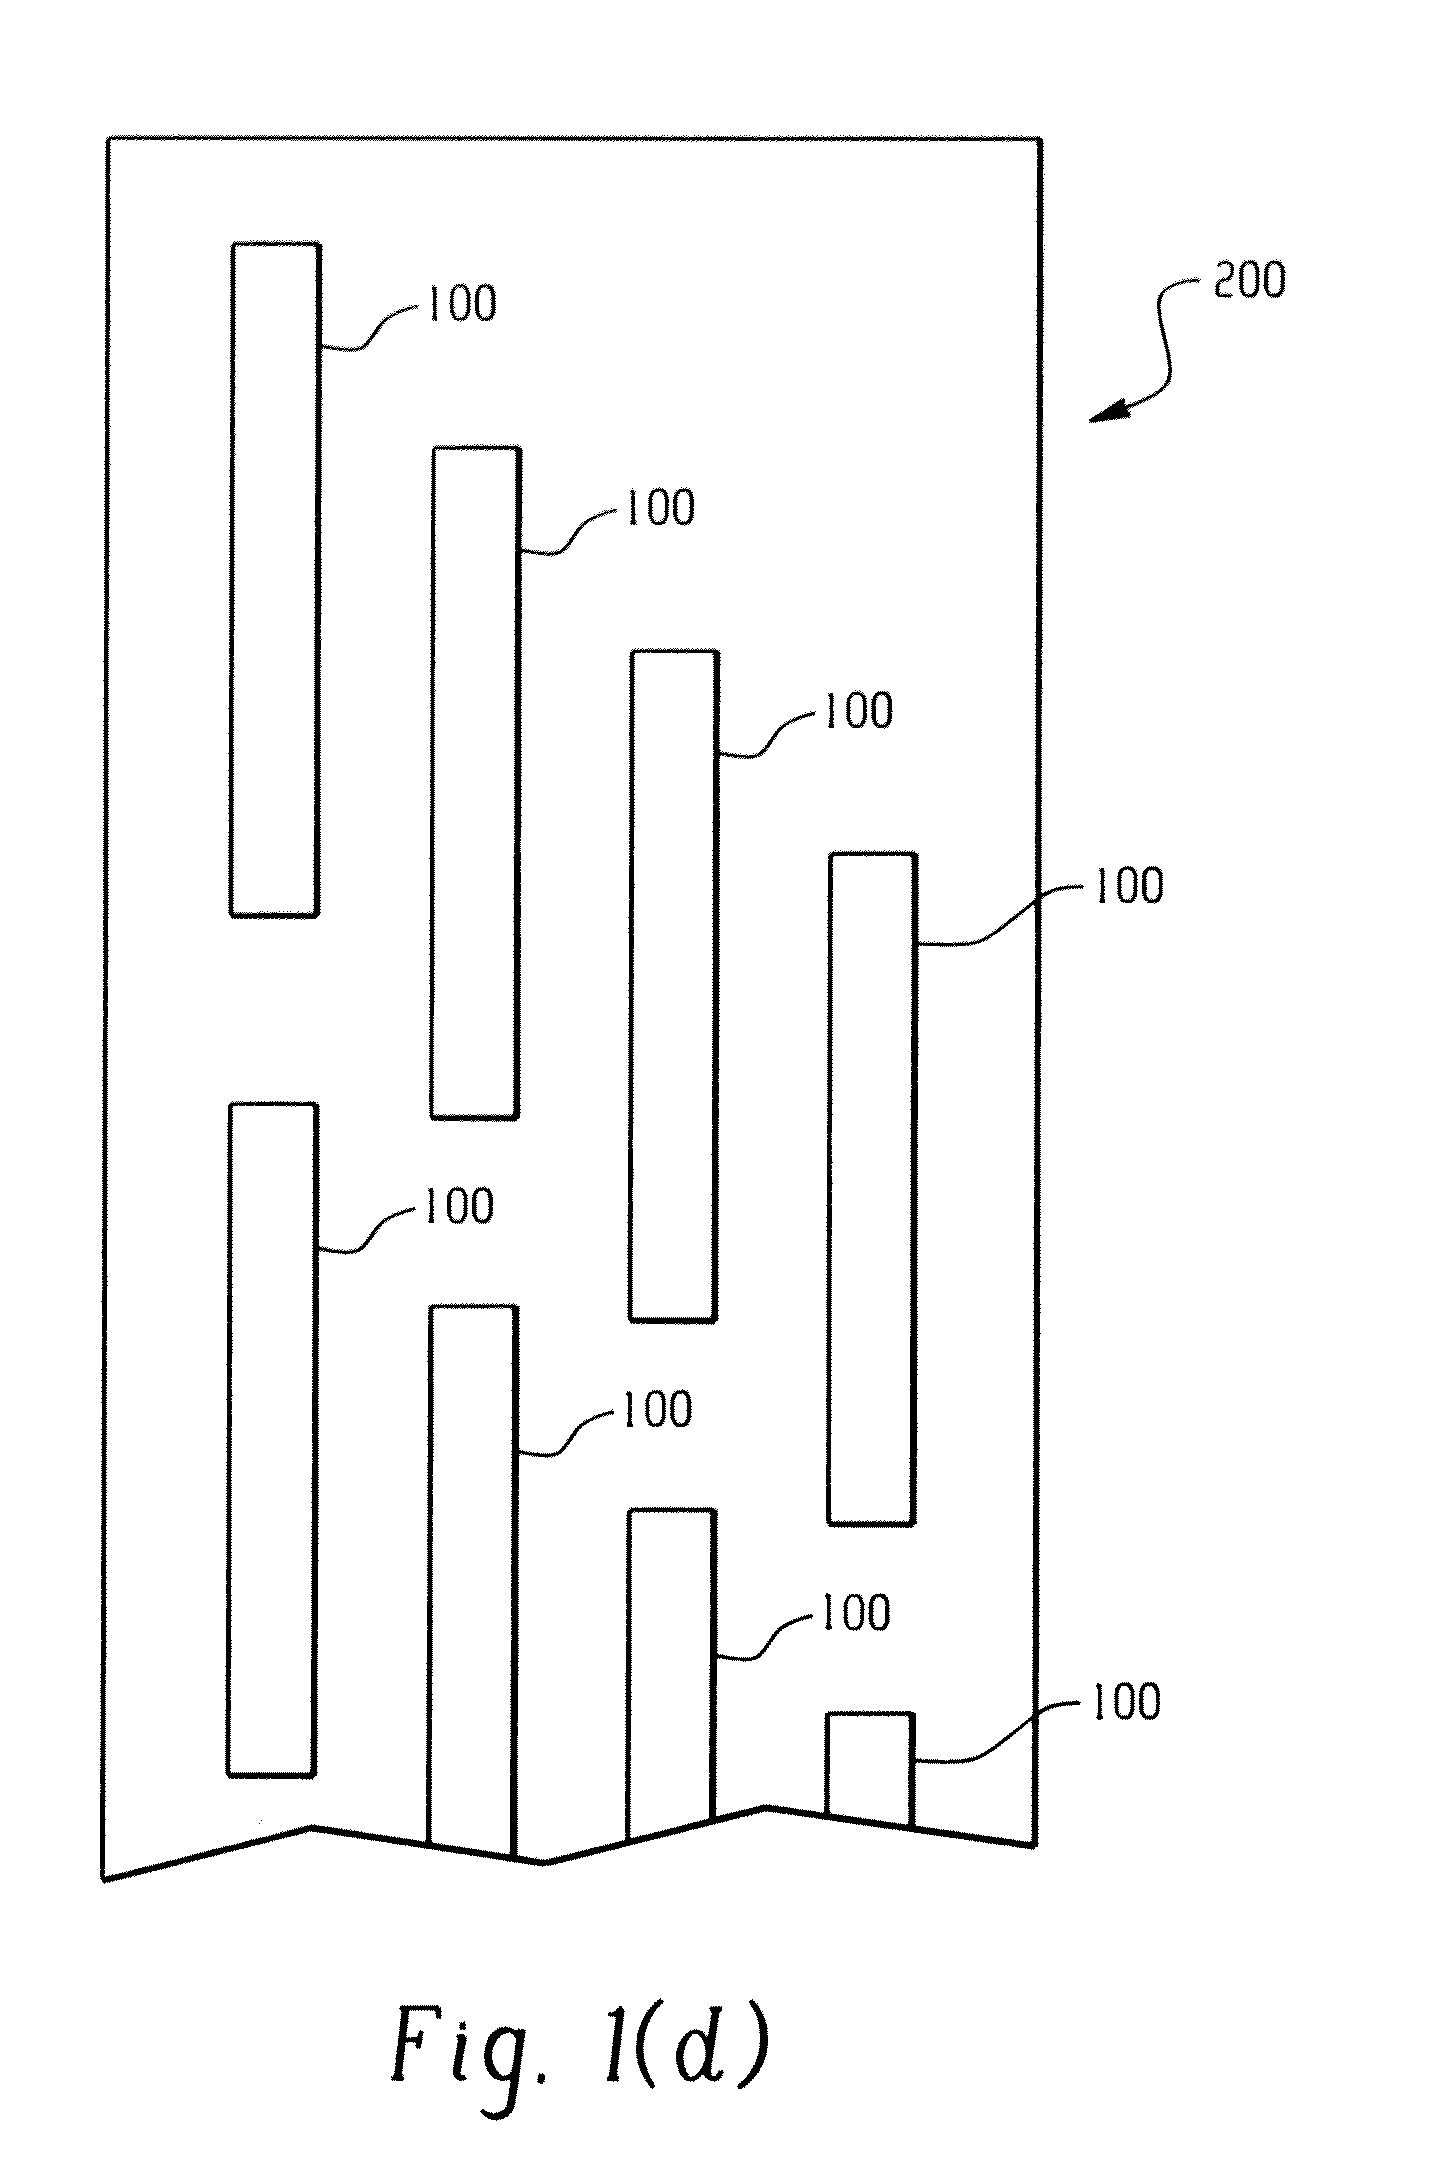 Digital heat injection by way of surface emitting semi-conductor devices